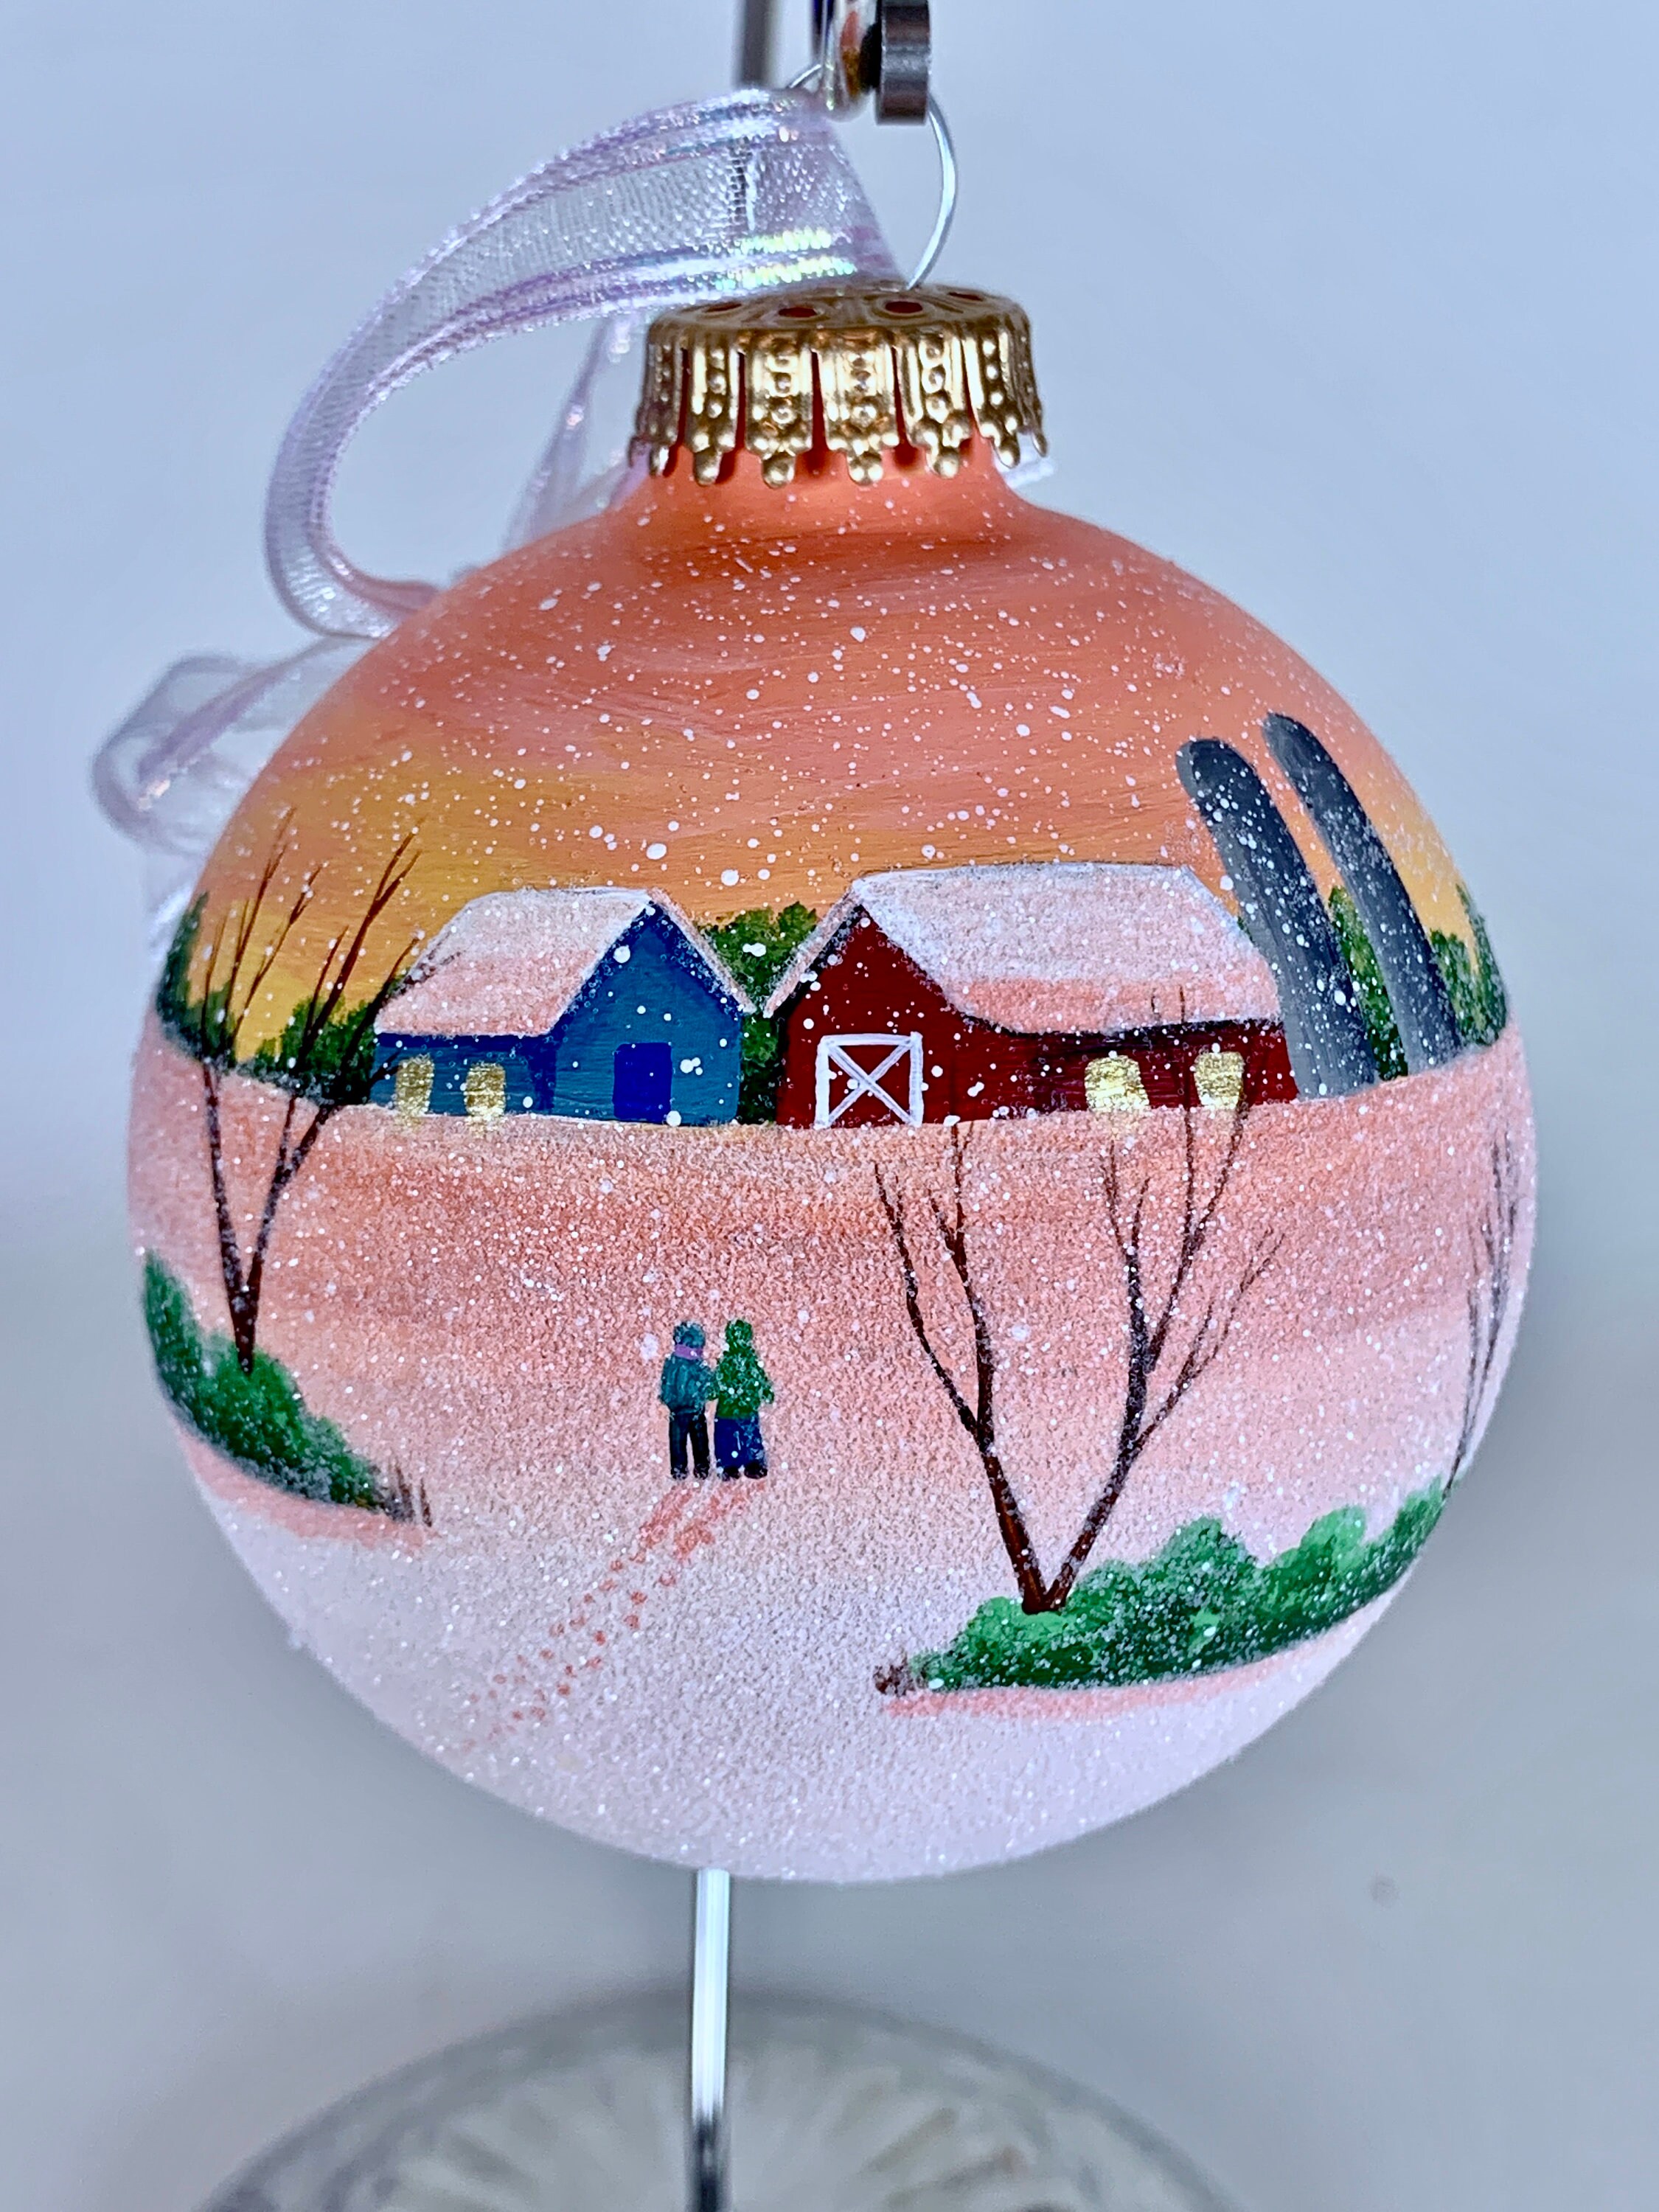 Hand-painted Wooden Ornament- Christmas Tree Farm